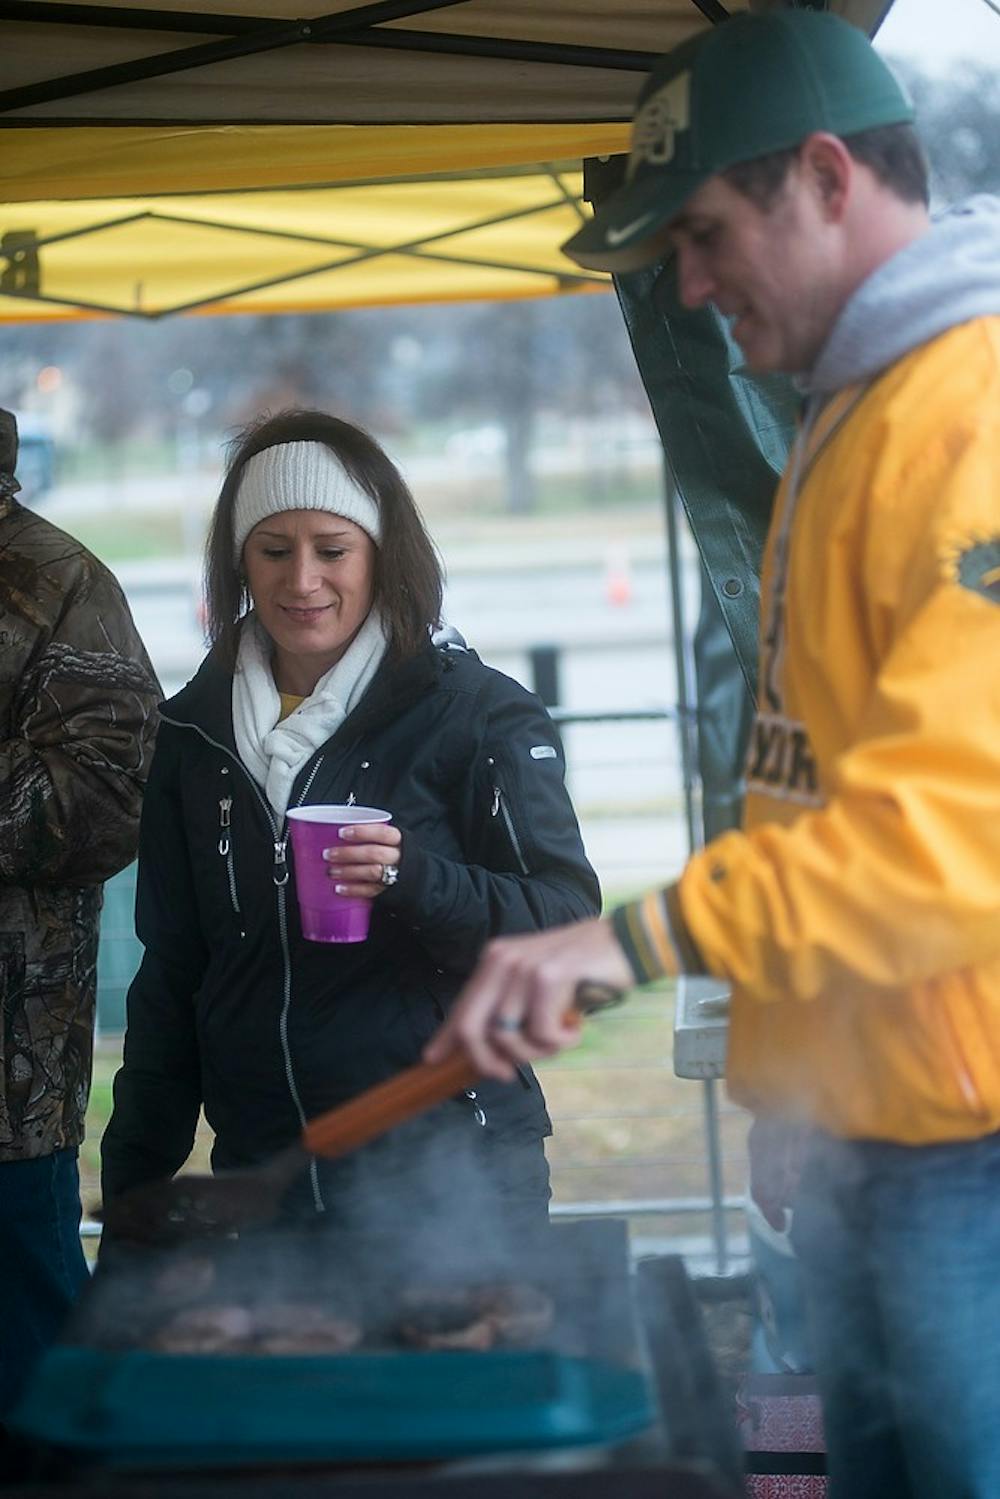 <p>Rockwall, Texas residents and Baylor fans Dee Dee and Rick Flynt cook sausage under their tent Jan. 1, 2015, while tailgating before The Cotton Bowl Classic football game against Baylor at AT&T Stadium in Arlington, Texas. It was 34 degrees in Dallas with showers. Erin Hampton/The State News</p>